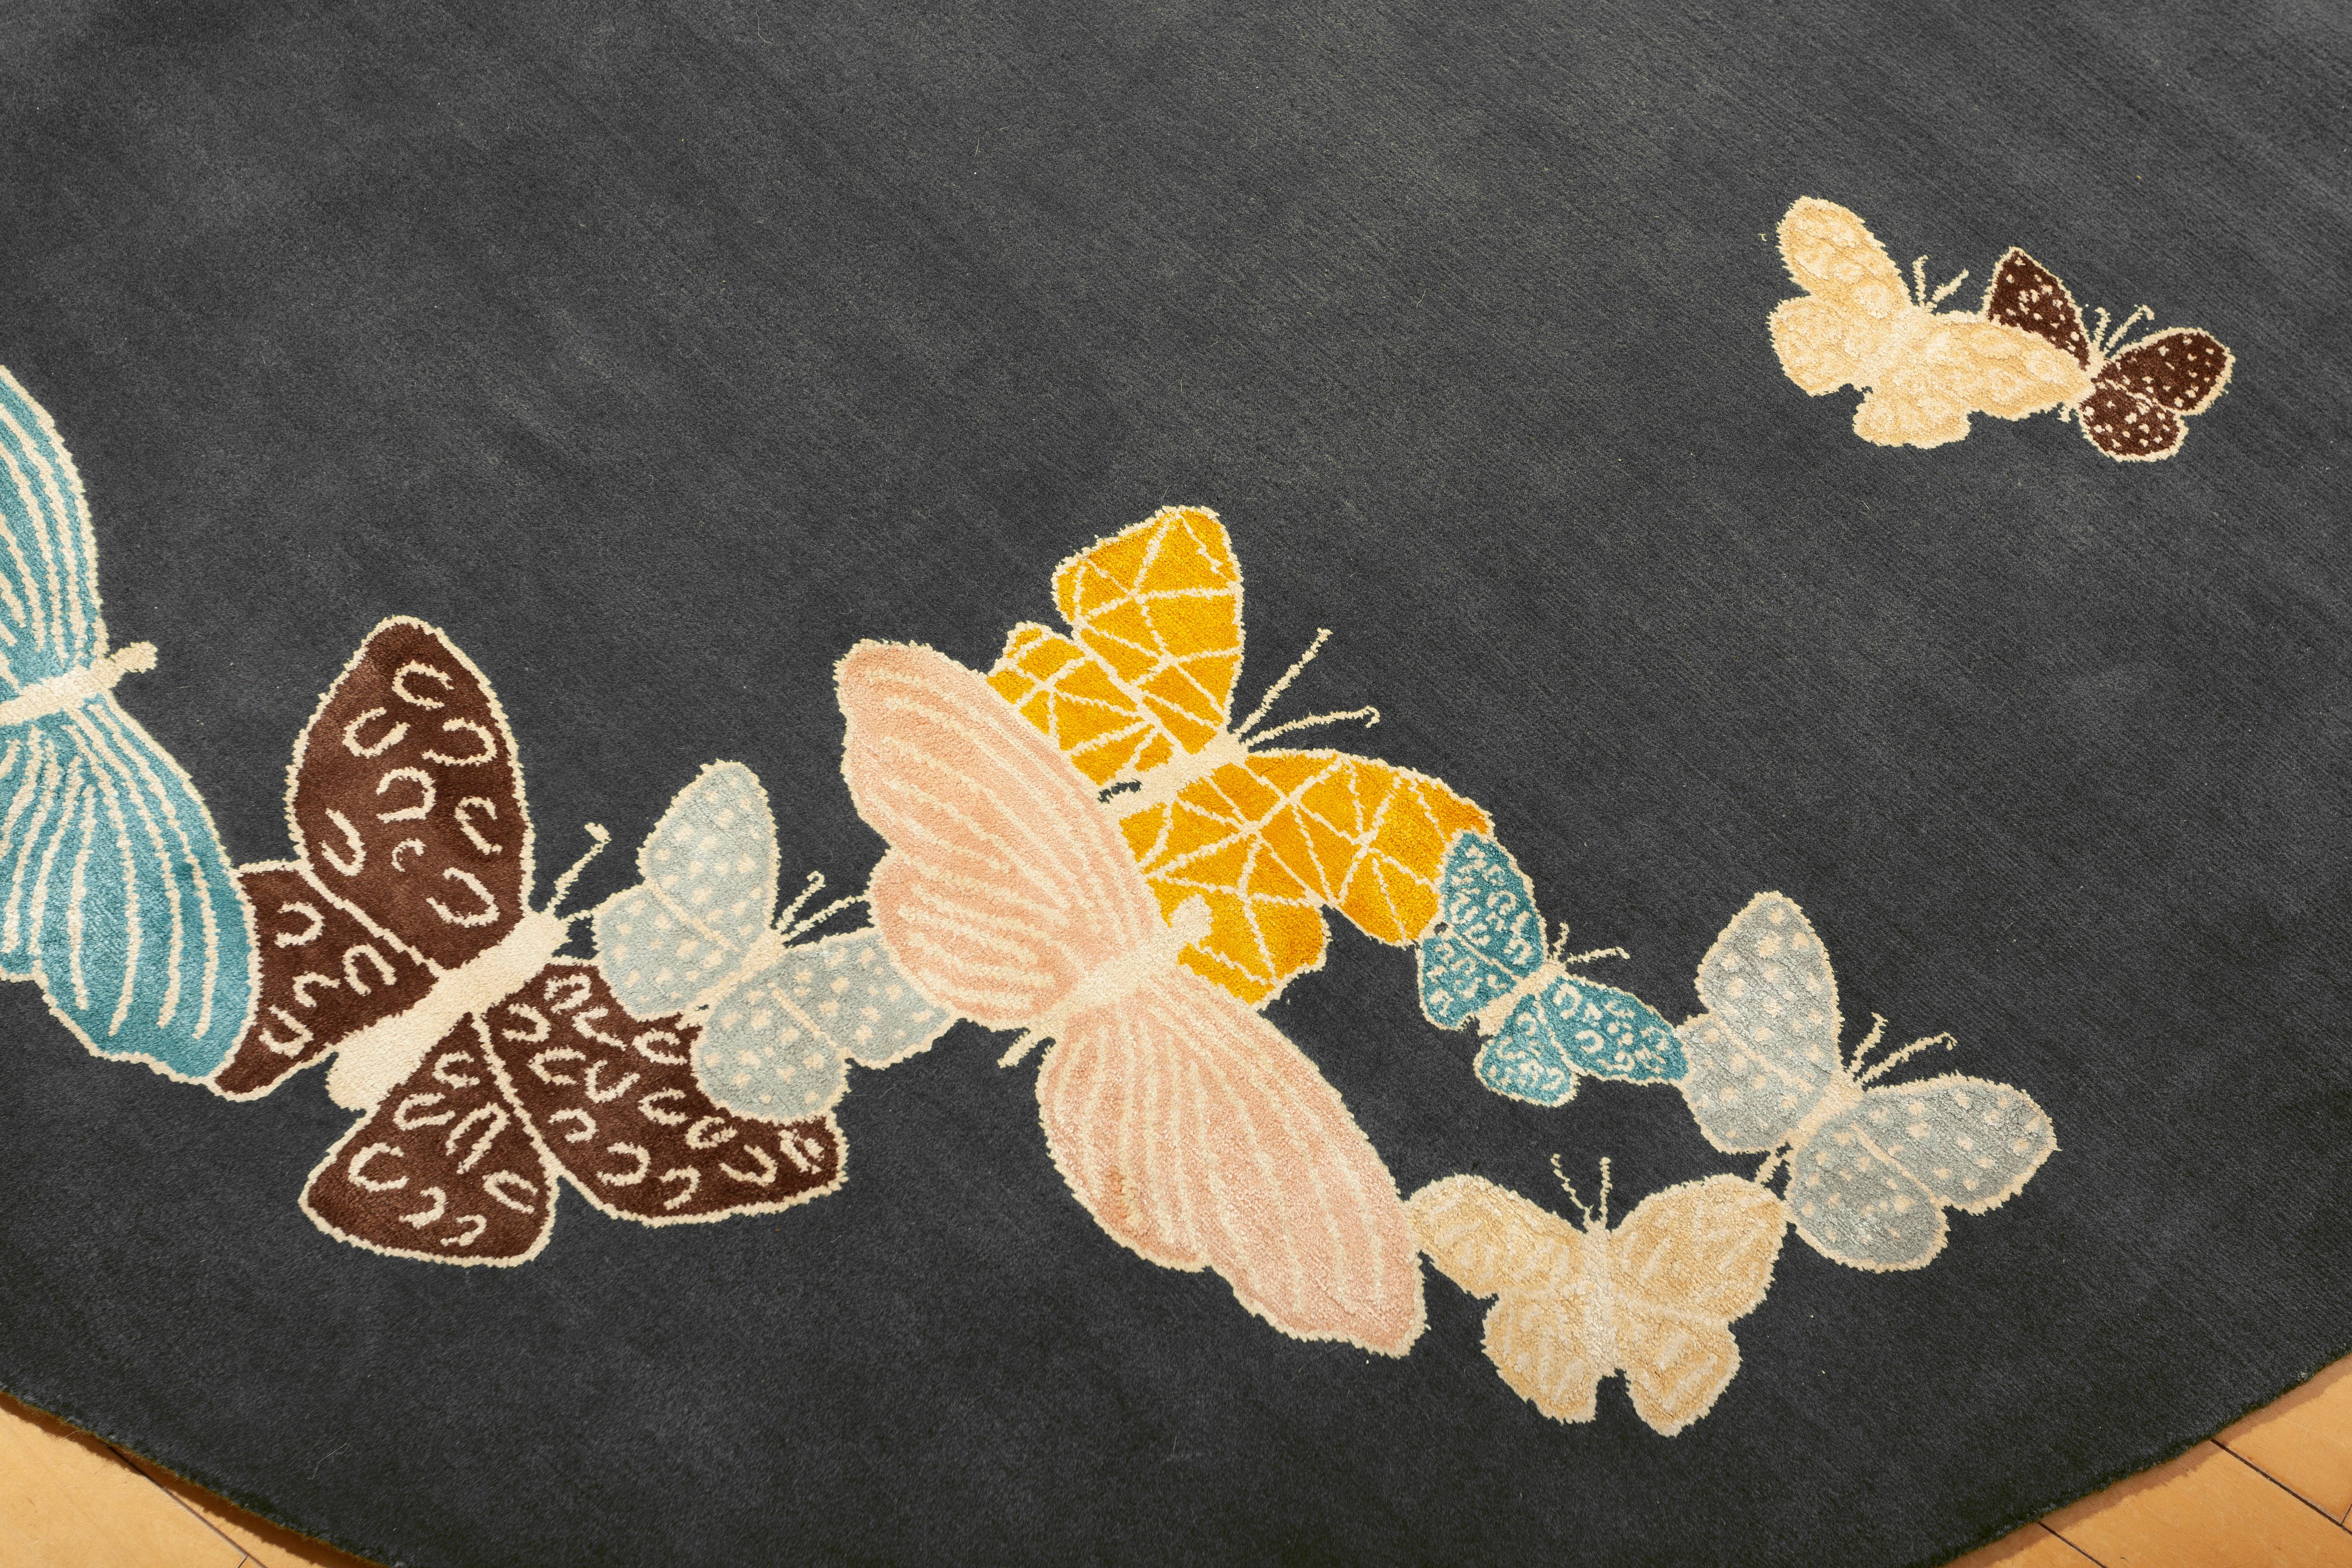 Sergio Mannino Studio's collection of rugs is expanded with new designs.
Hand-drawn butterflies seem to come out of the floor. The background is wool, while the butterflies are made with a silk thread.

Any new combination of colors (and sizes)